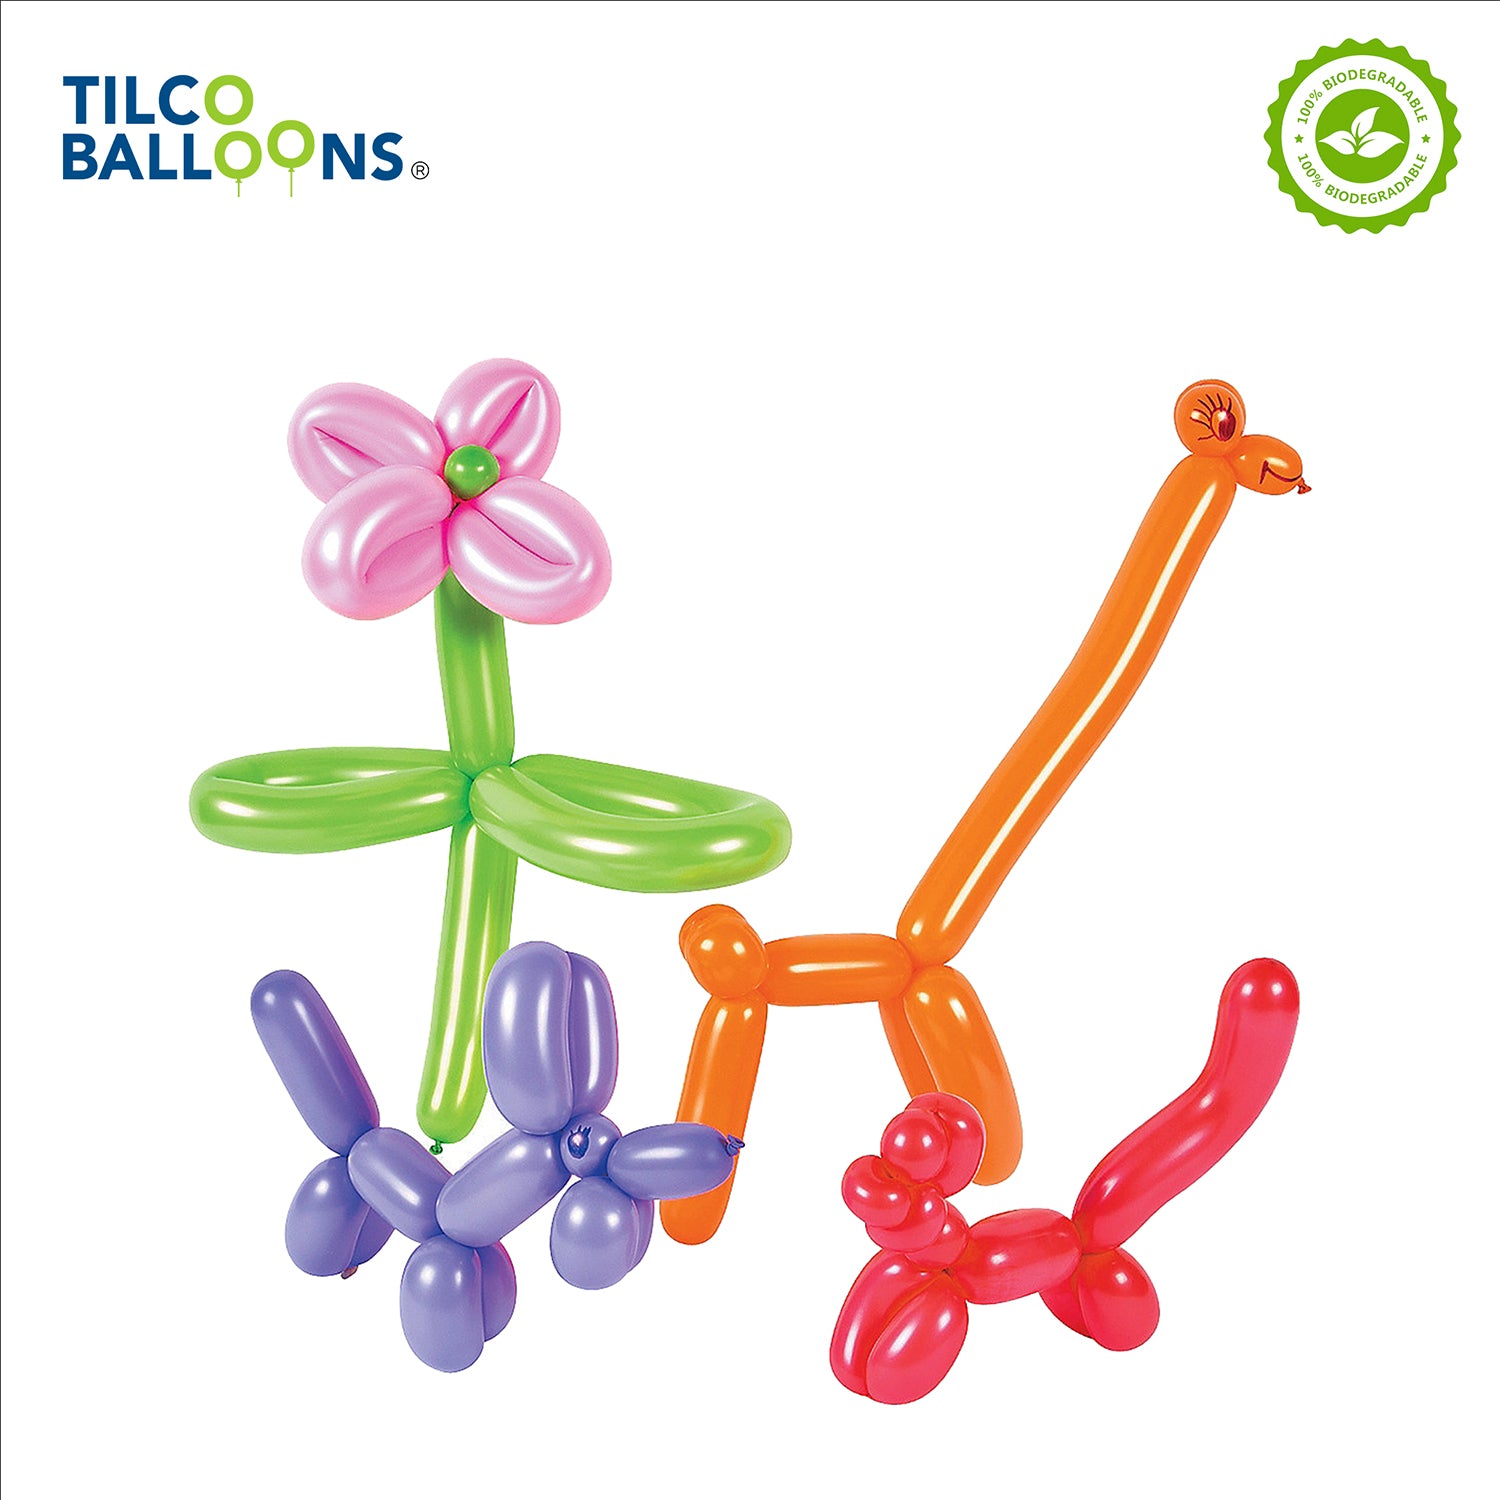 260 Scarlet Red Twisting Balloon Figures